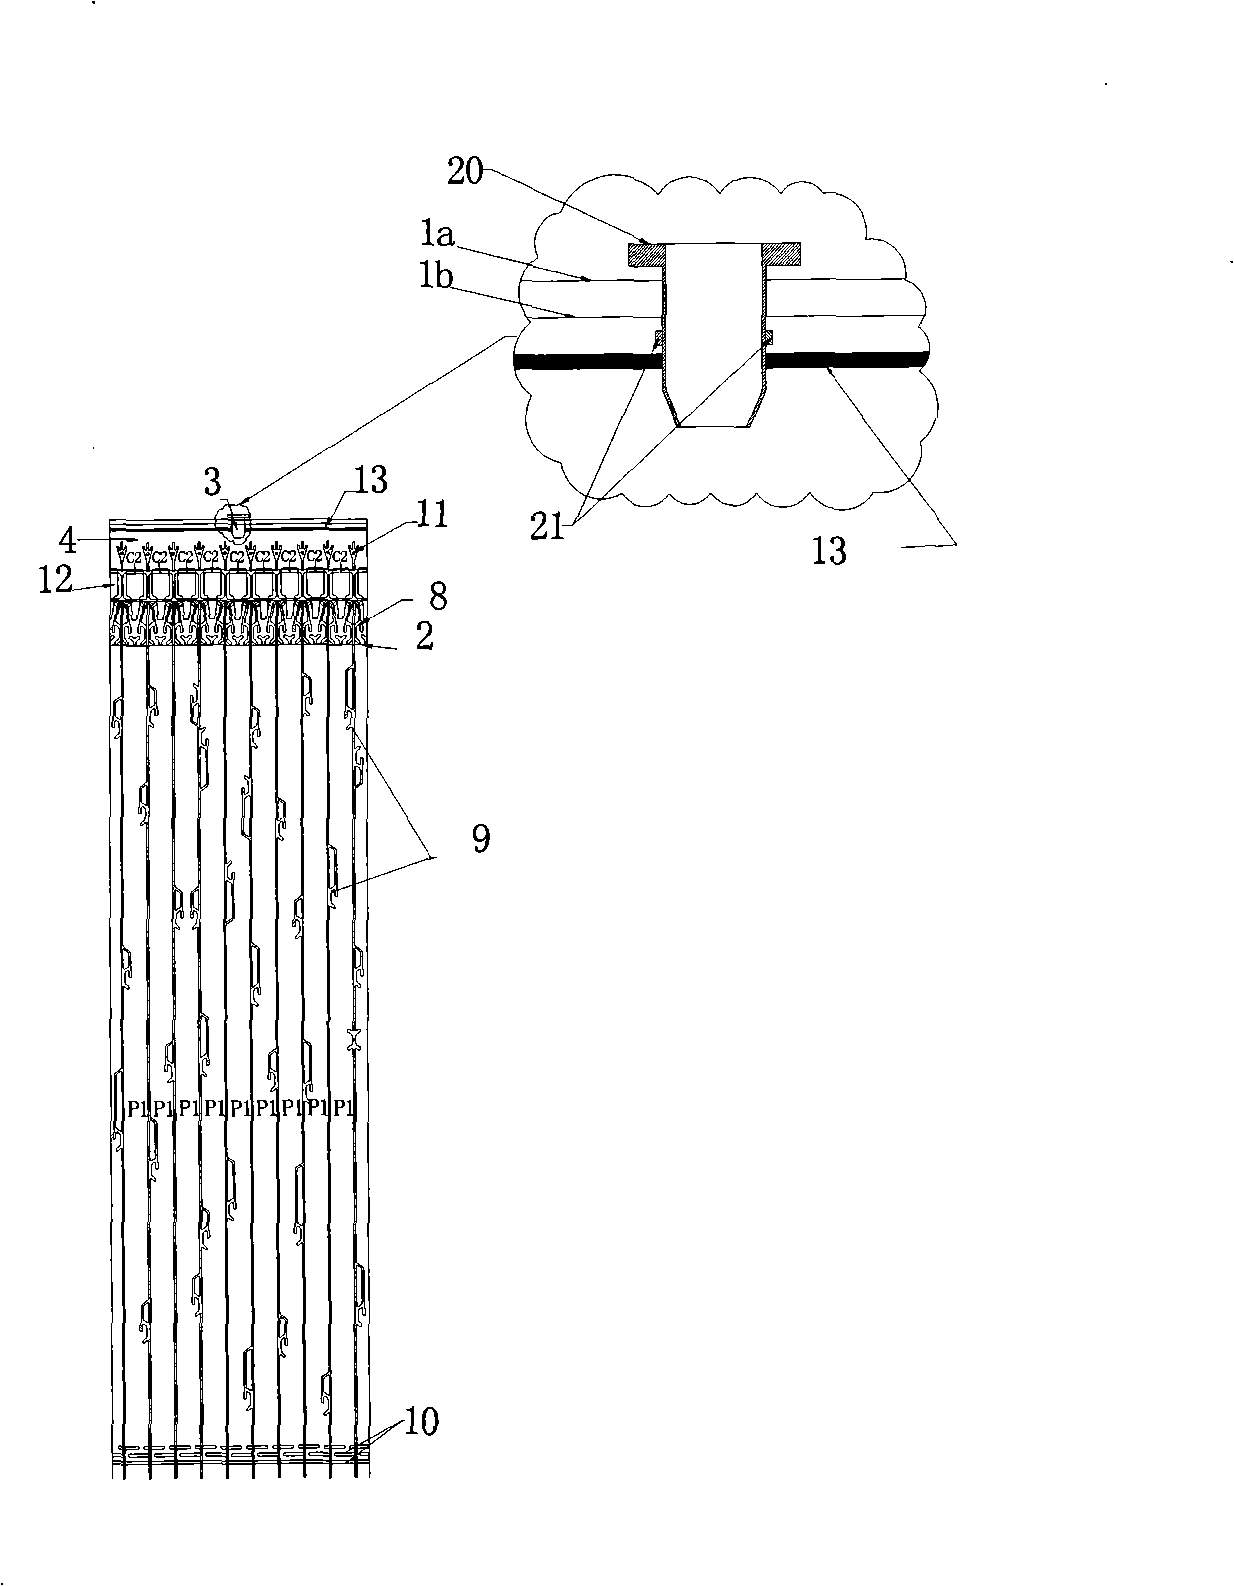 Reusable multifunctional three-dimension sealing and packing material and method for preparing same